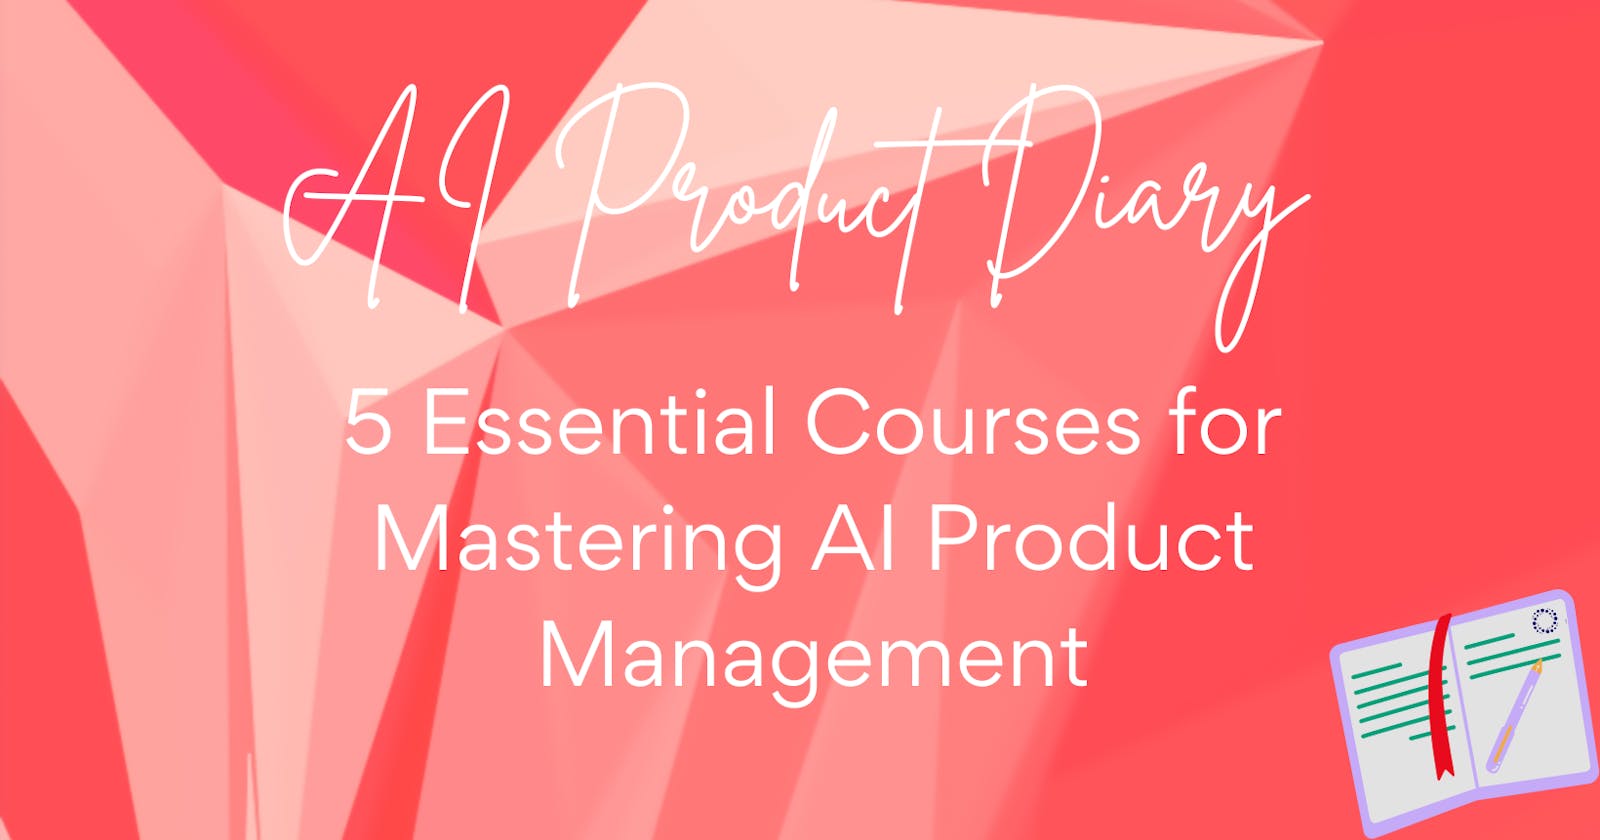 Mastering AI Product Management: 5 Essential Courses for Career Growth